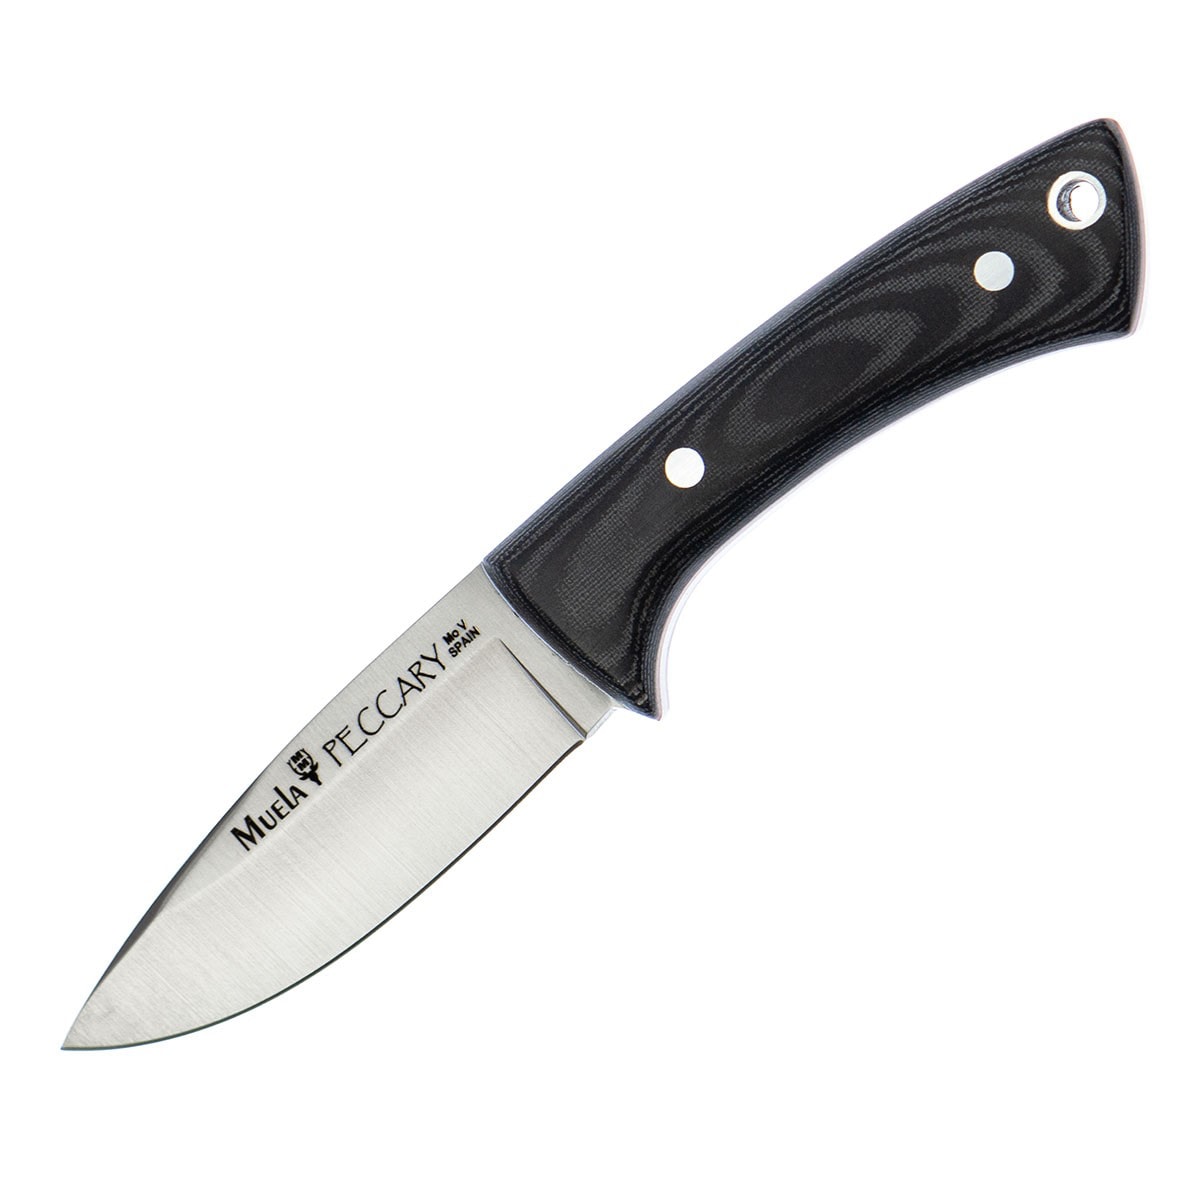 Hunting knife PECCARY-8M